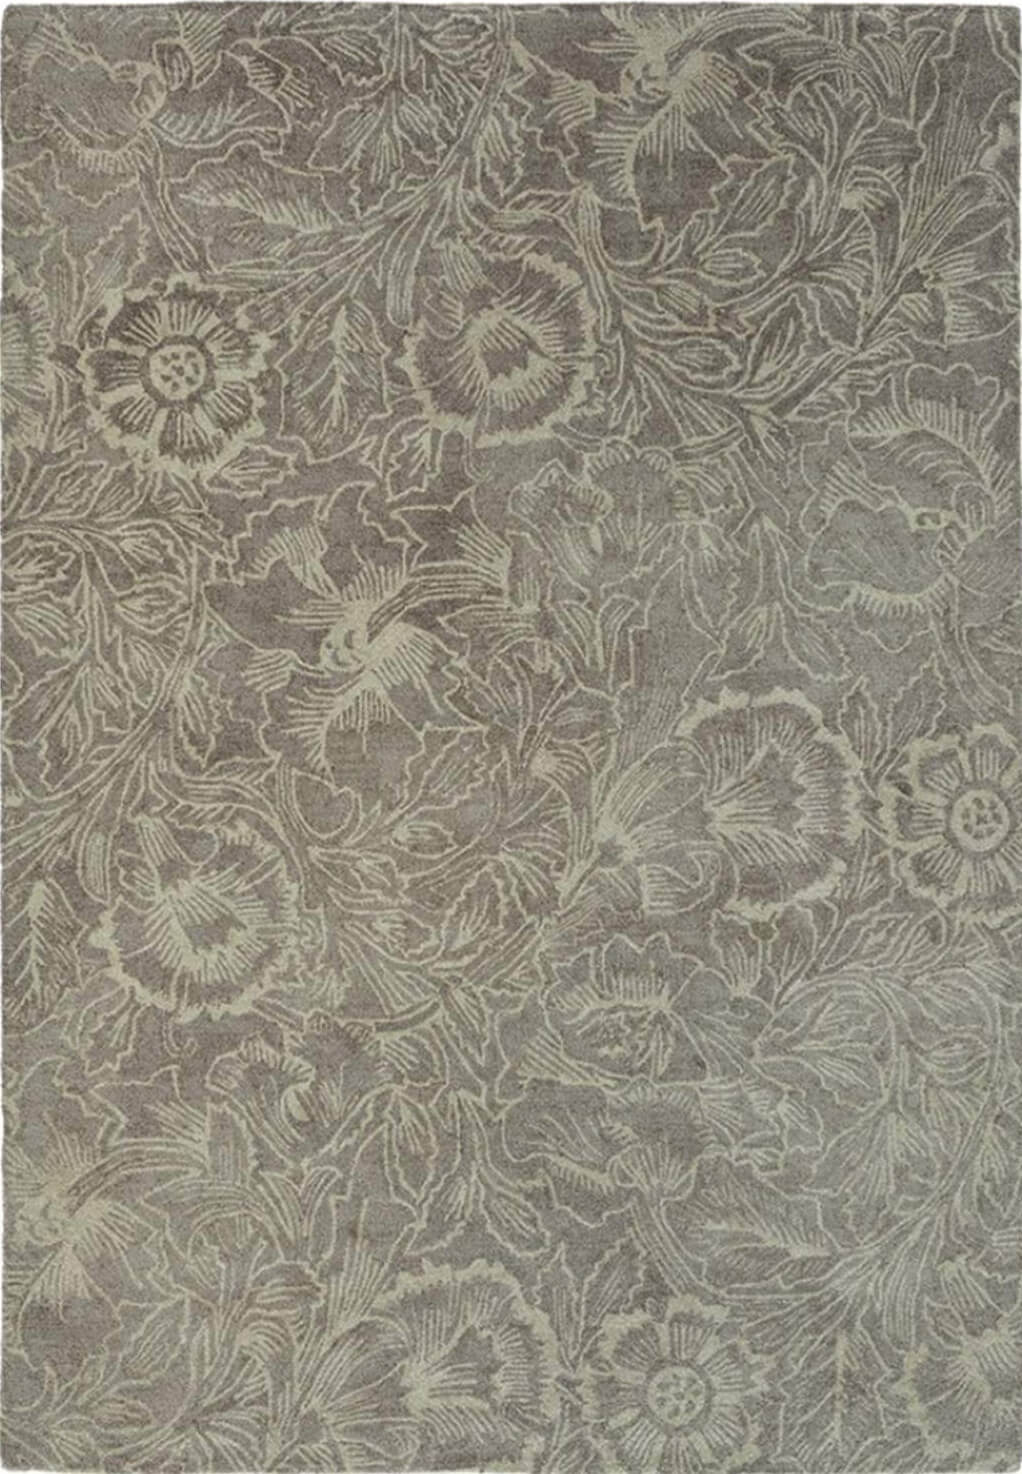 Poppy Taupe 28405 Rug by Brink & Campman ☞ Size: 170 x 240 cm